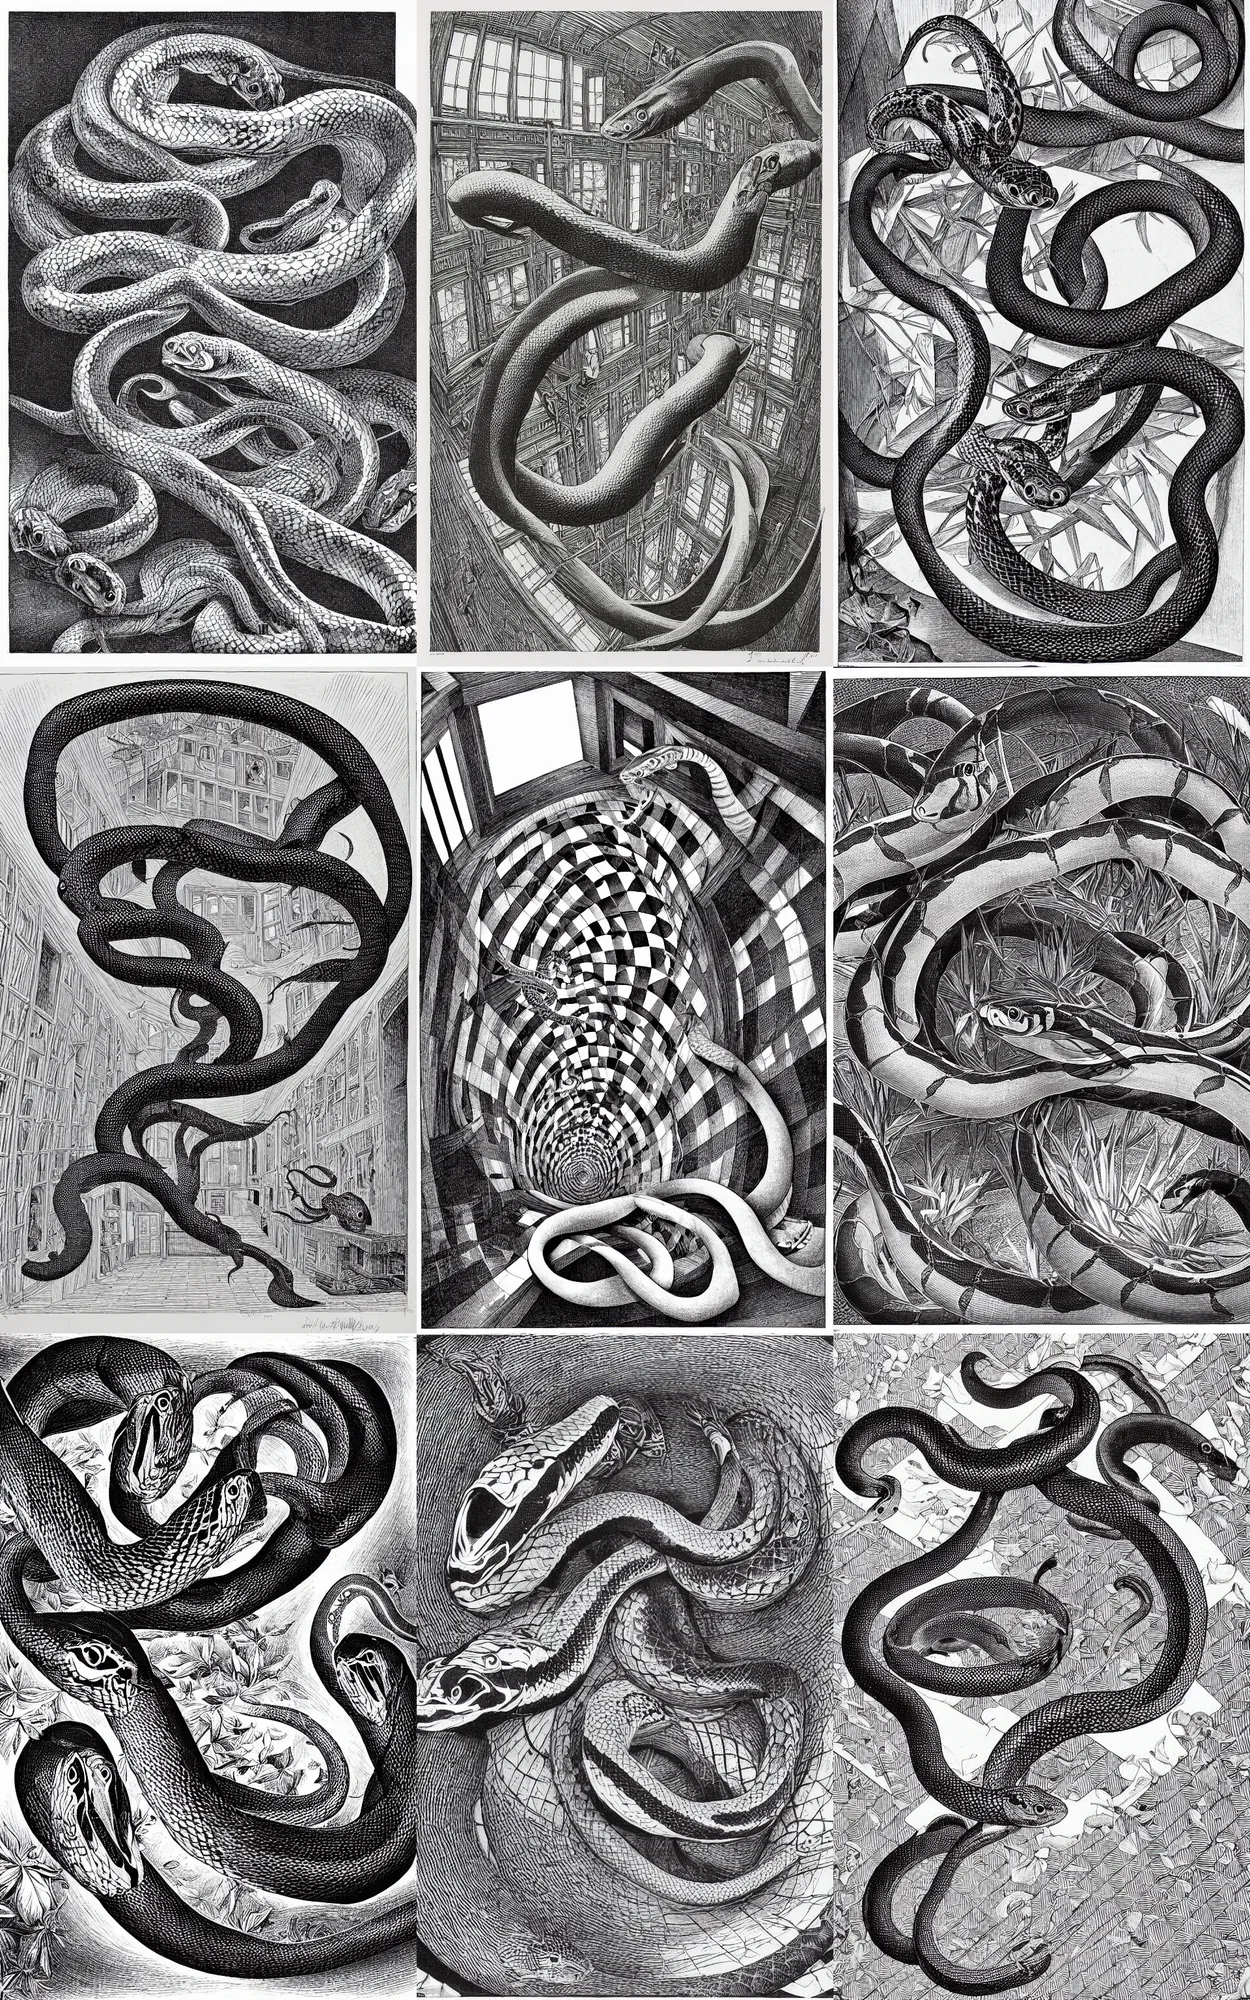 Prompt: escher. composition : fish eye lens. style : lithography. scenery : a checkered room. subject : a snake with long red tail. action : the snake is biting it's own tail.